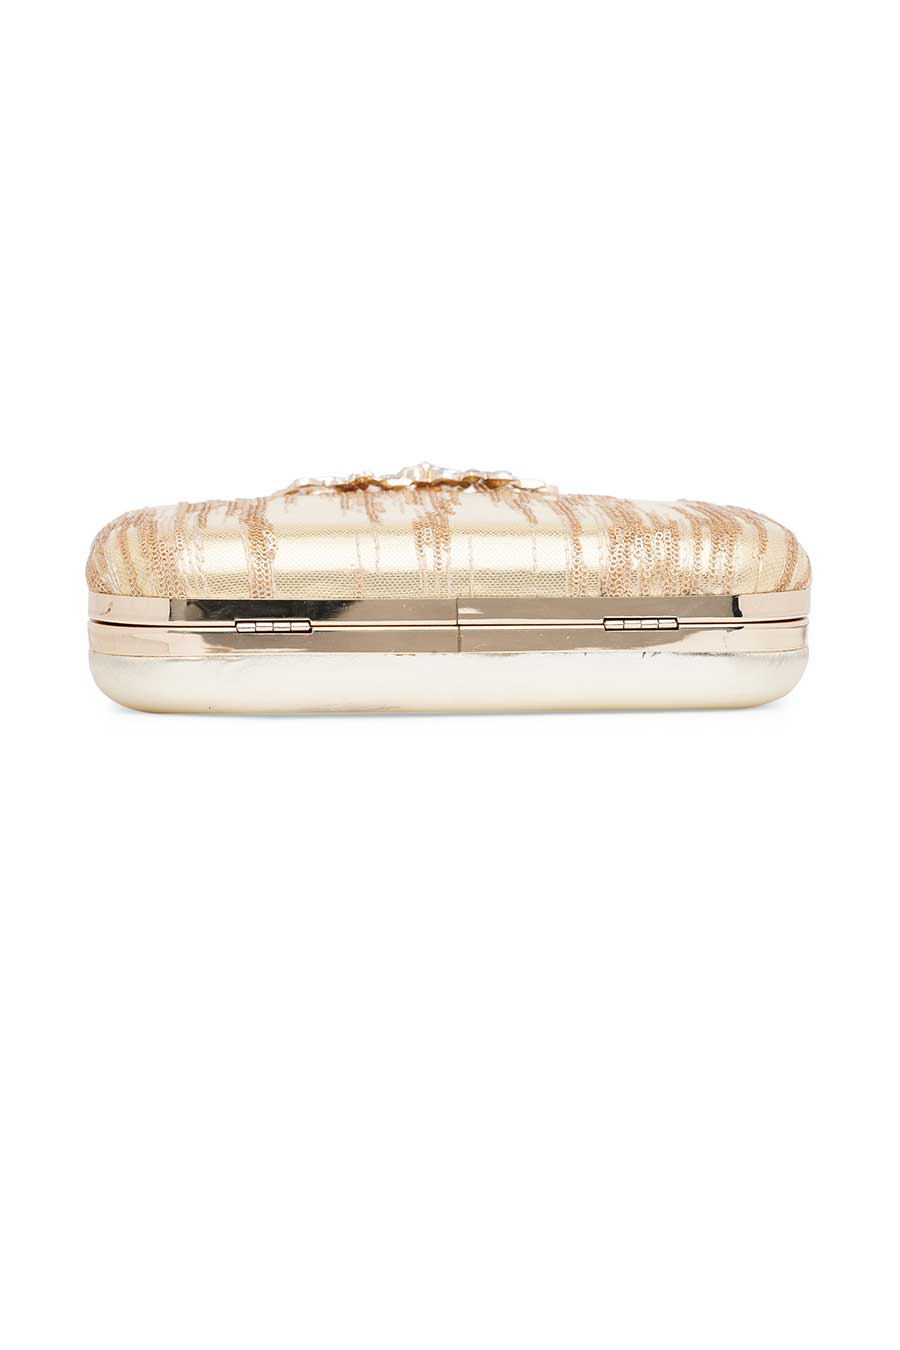 Jewel Frame Embroidered Gold Clutch